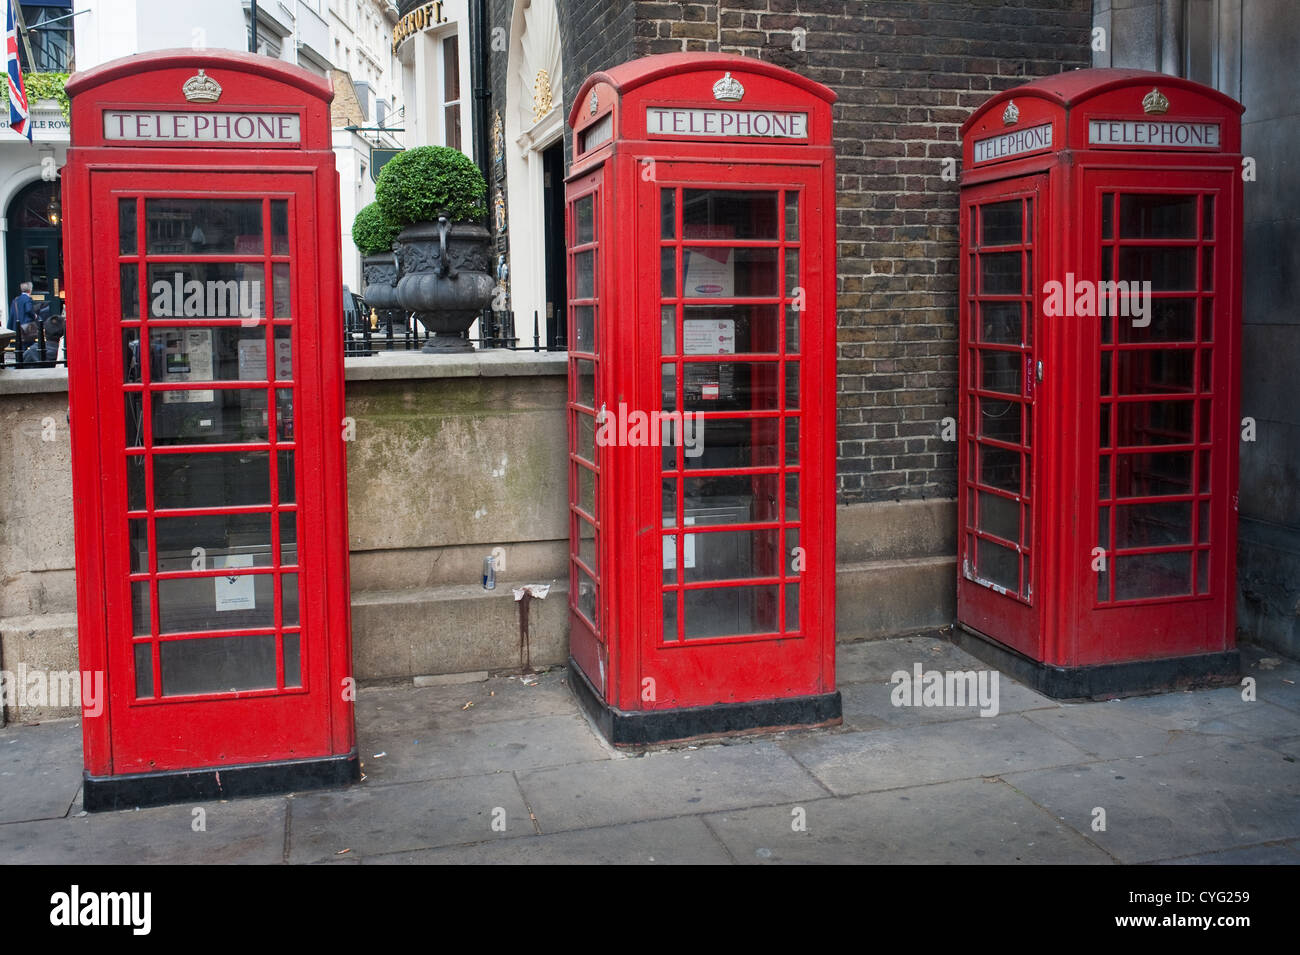 Three Phone boxes in a London street Stock Photo